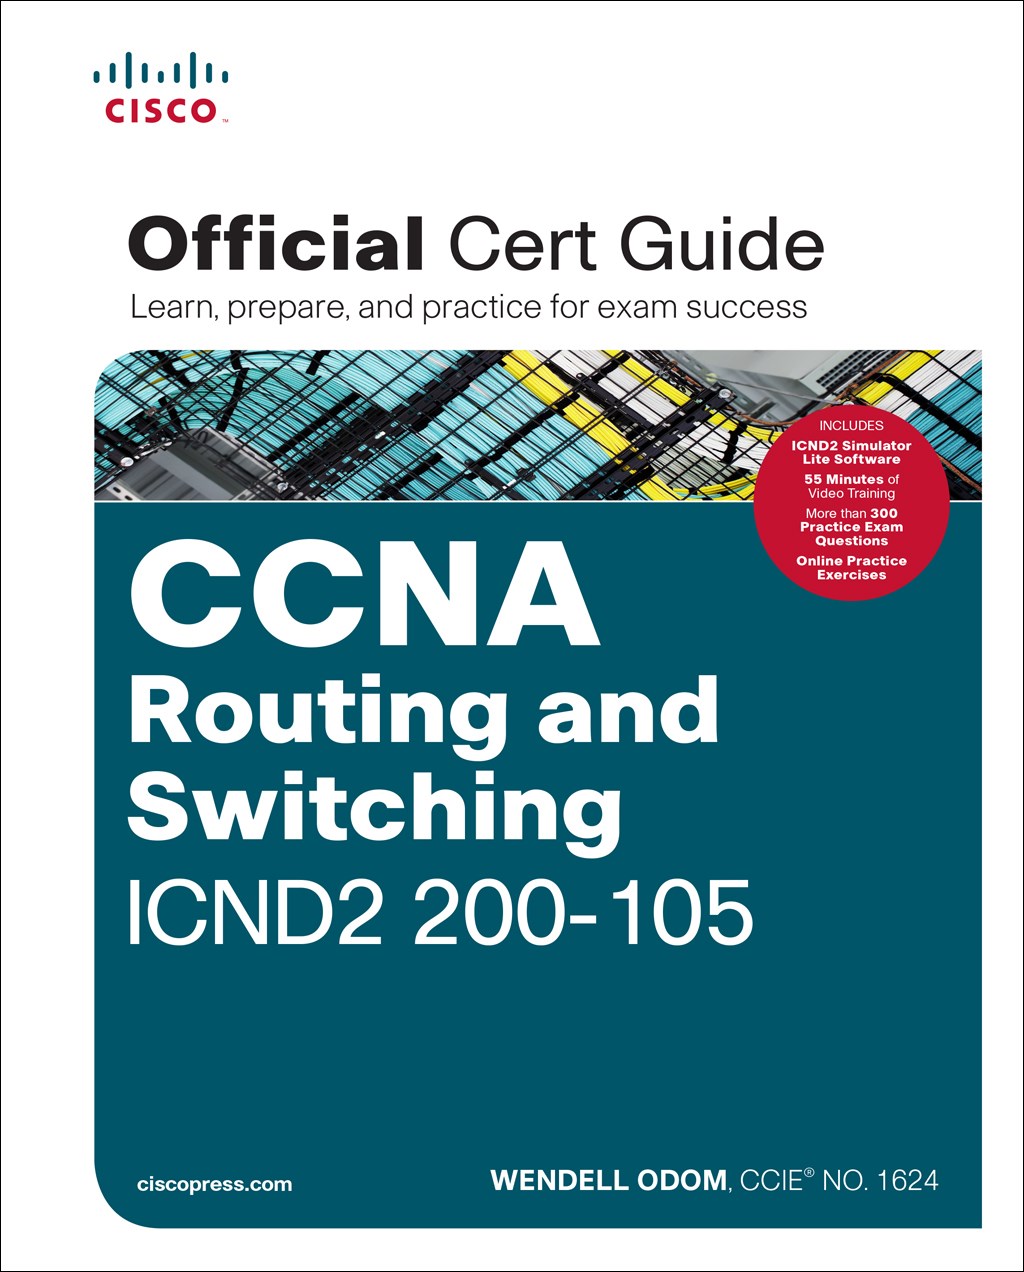 how to master ccna pdf free download